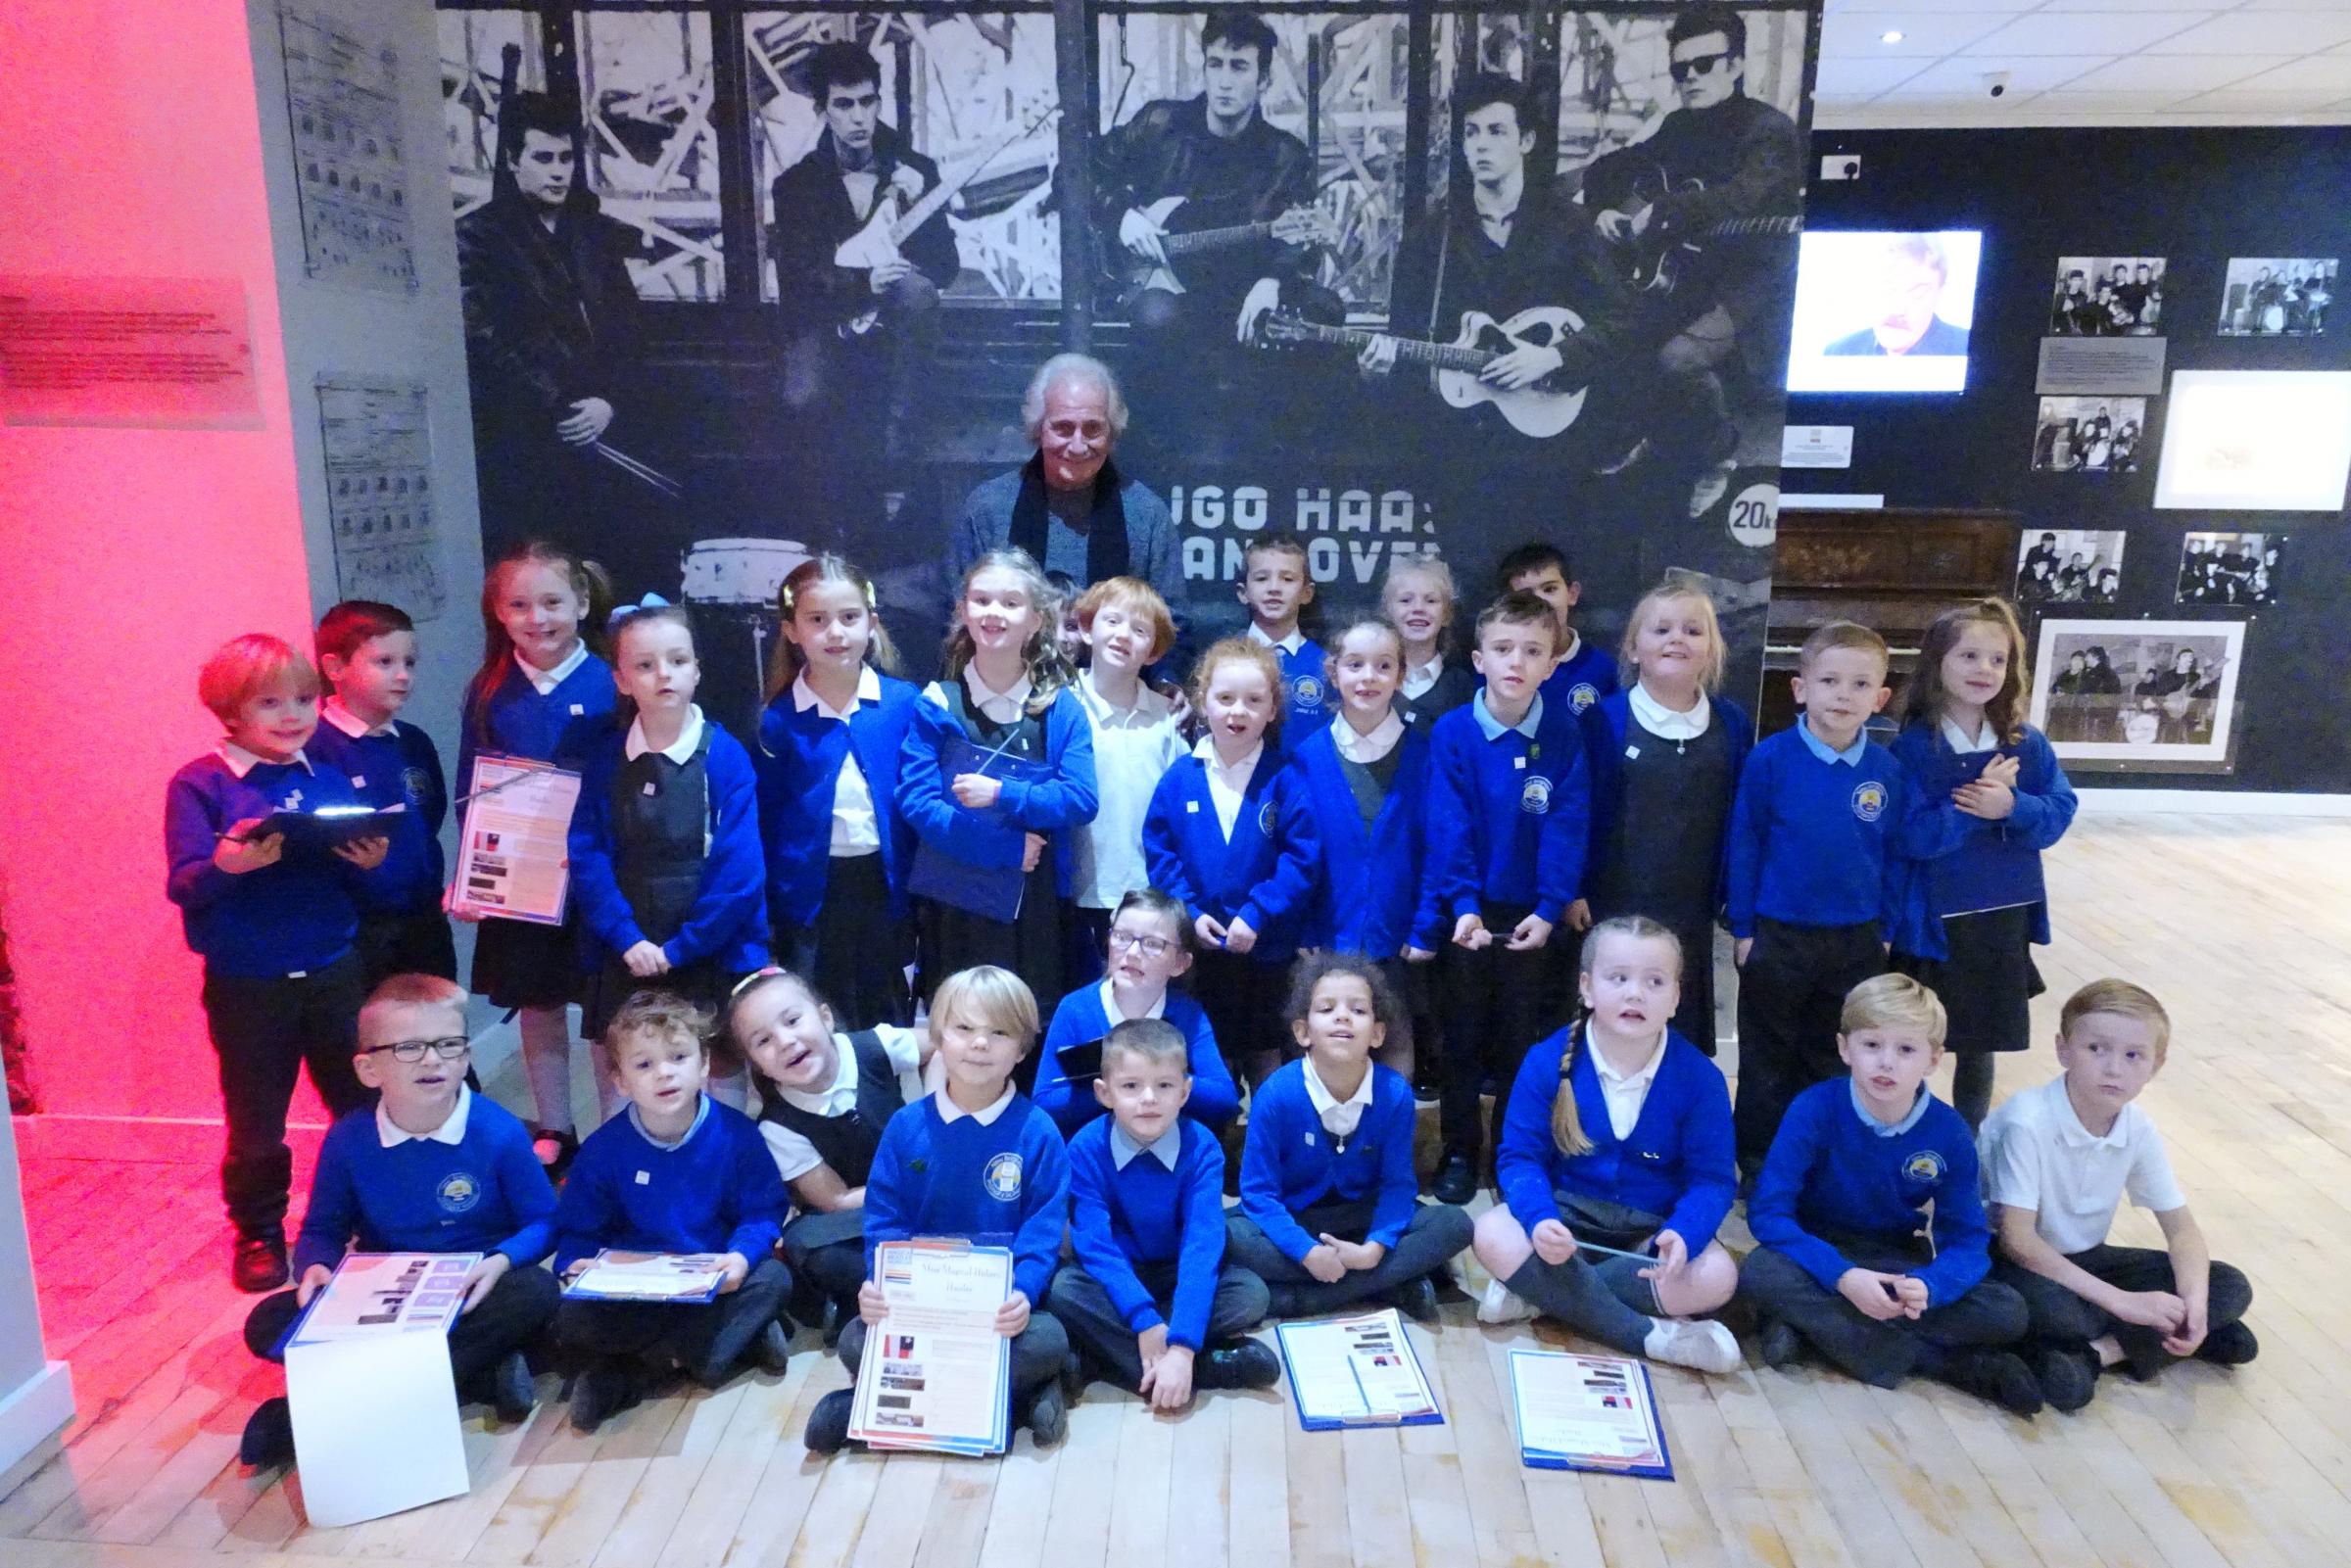 Wirral schoolchildren learn all about The Beatles from original drummer Pete Best